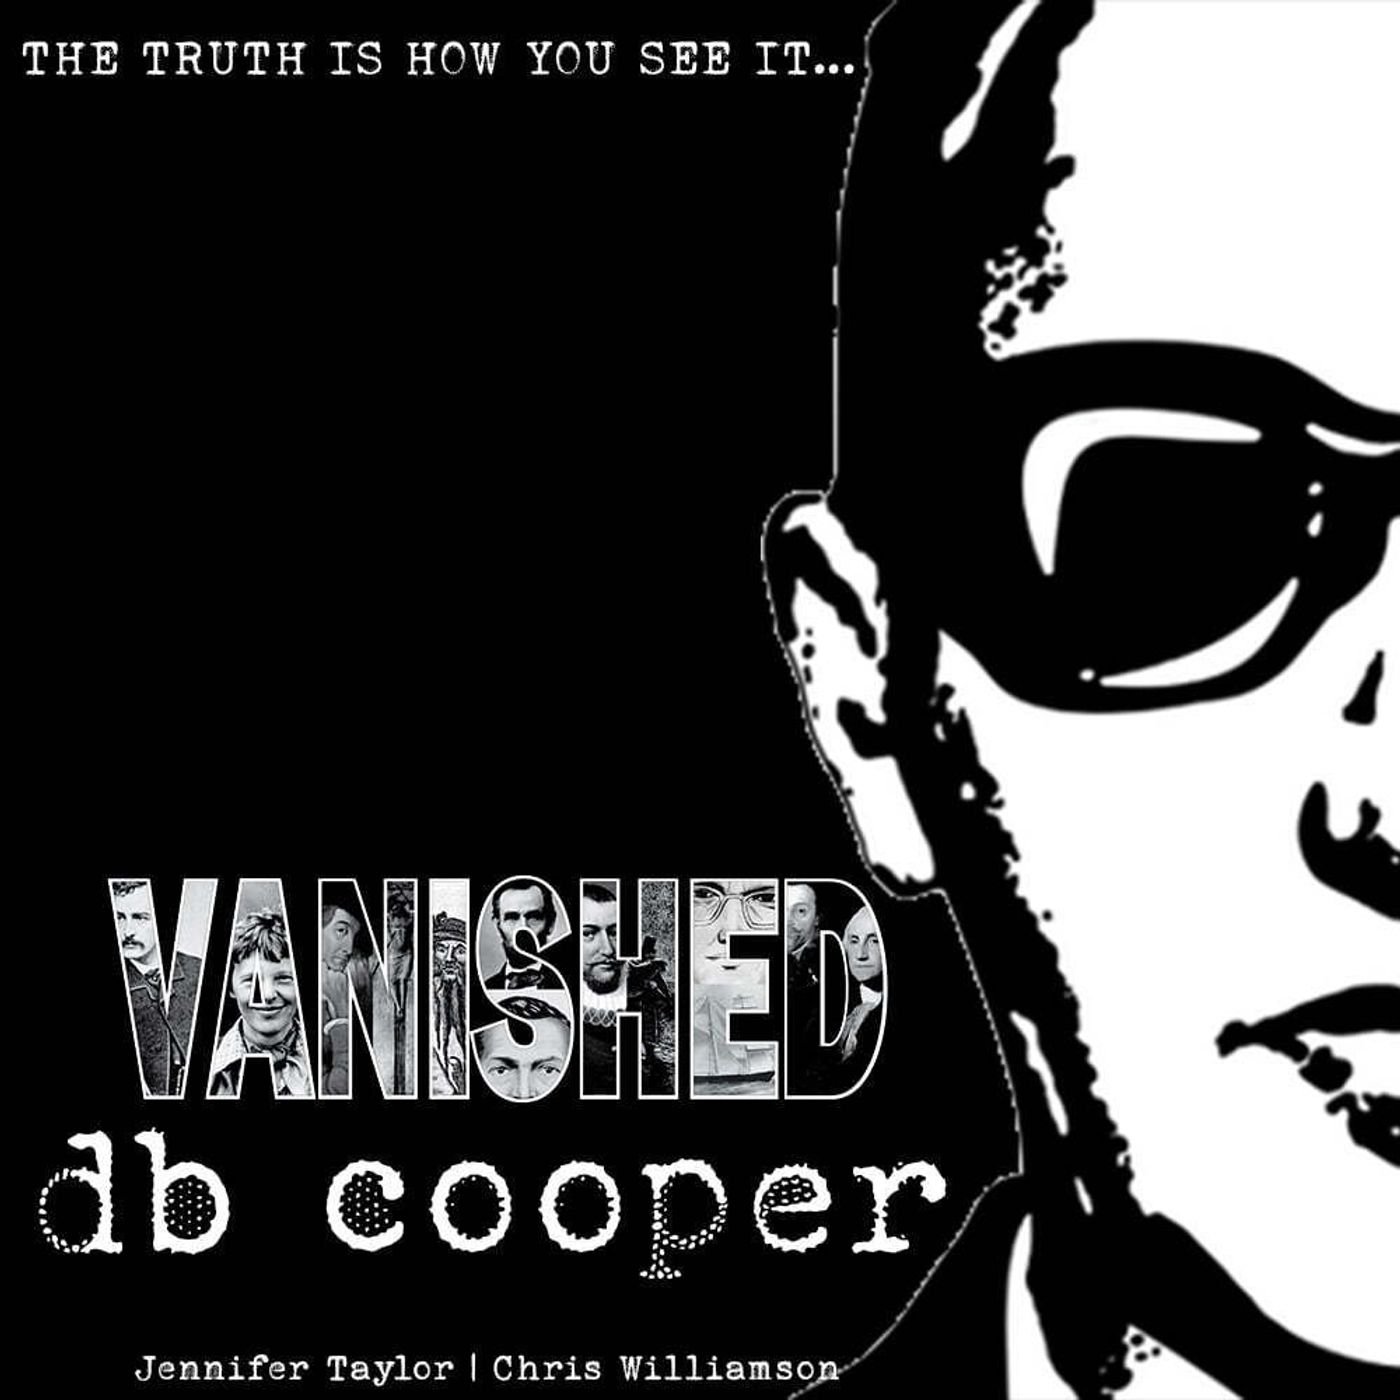 S2 Ep13: Vanished: DB Cooper "Trial by Jury"